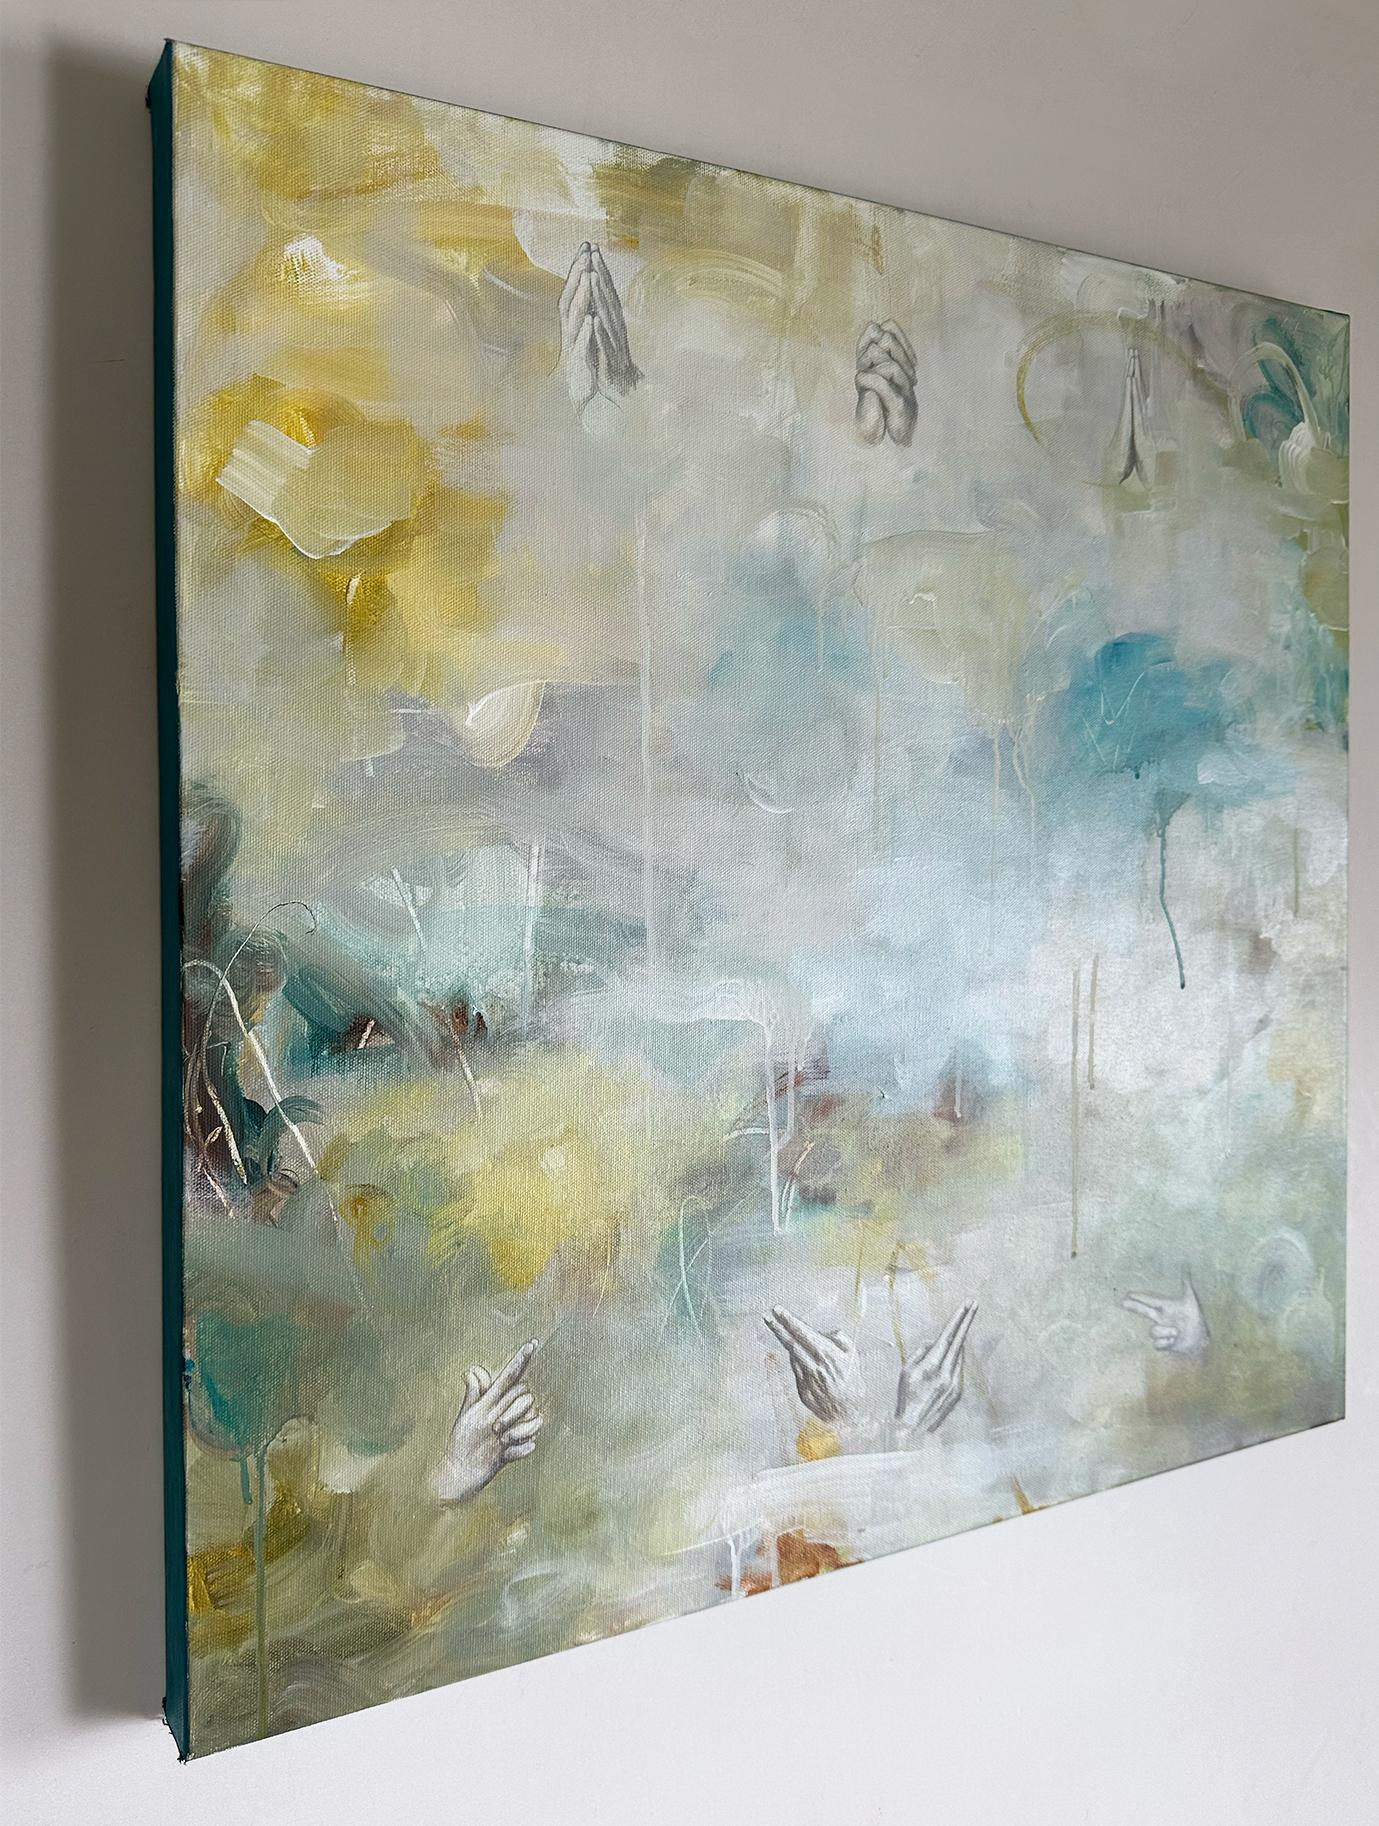 “True Believers” by Sandra Cohen is a 24 x 24 x 1 inch contemporary abstract landscape with overlaid figurative elements. A misty, humid landscape, loosely painted in blue, green, white and yellow suggests a road or path leading into some distance.